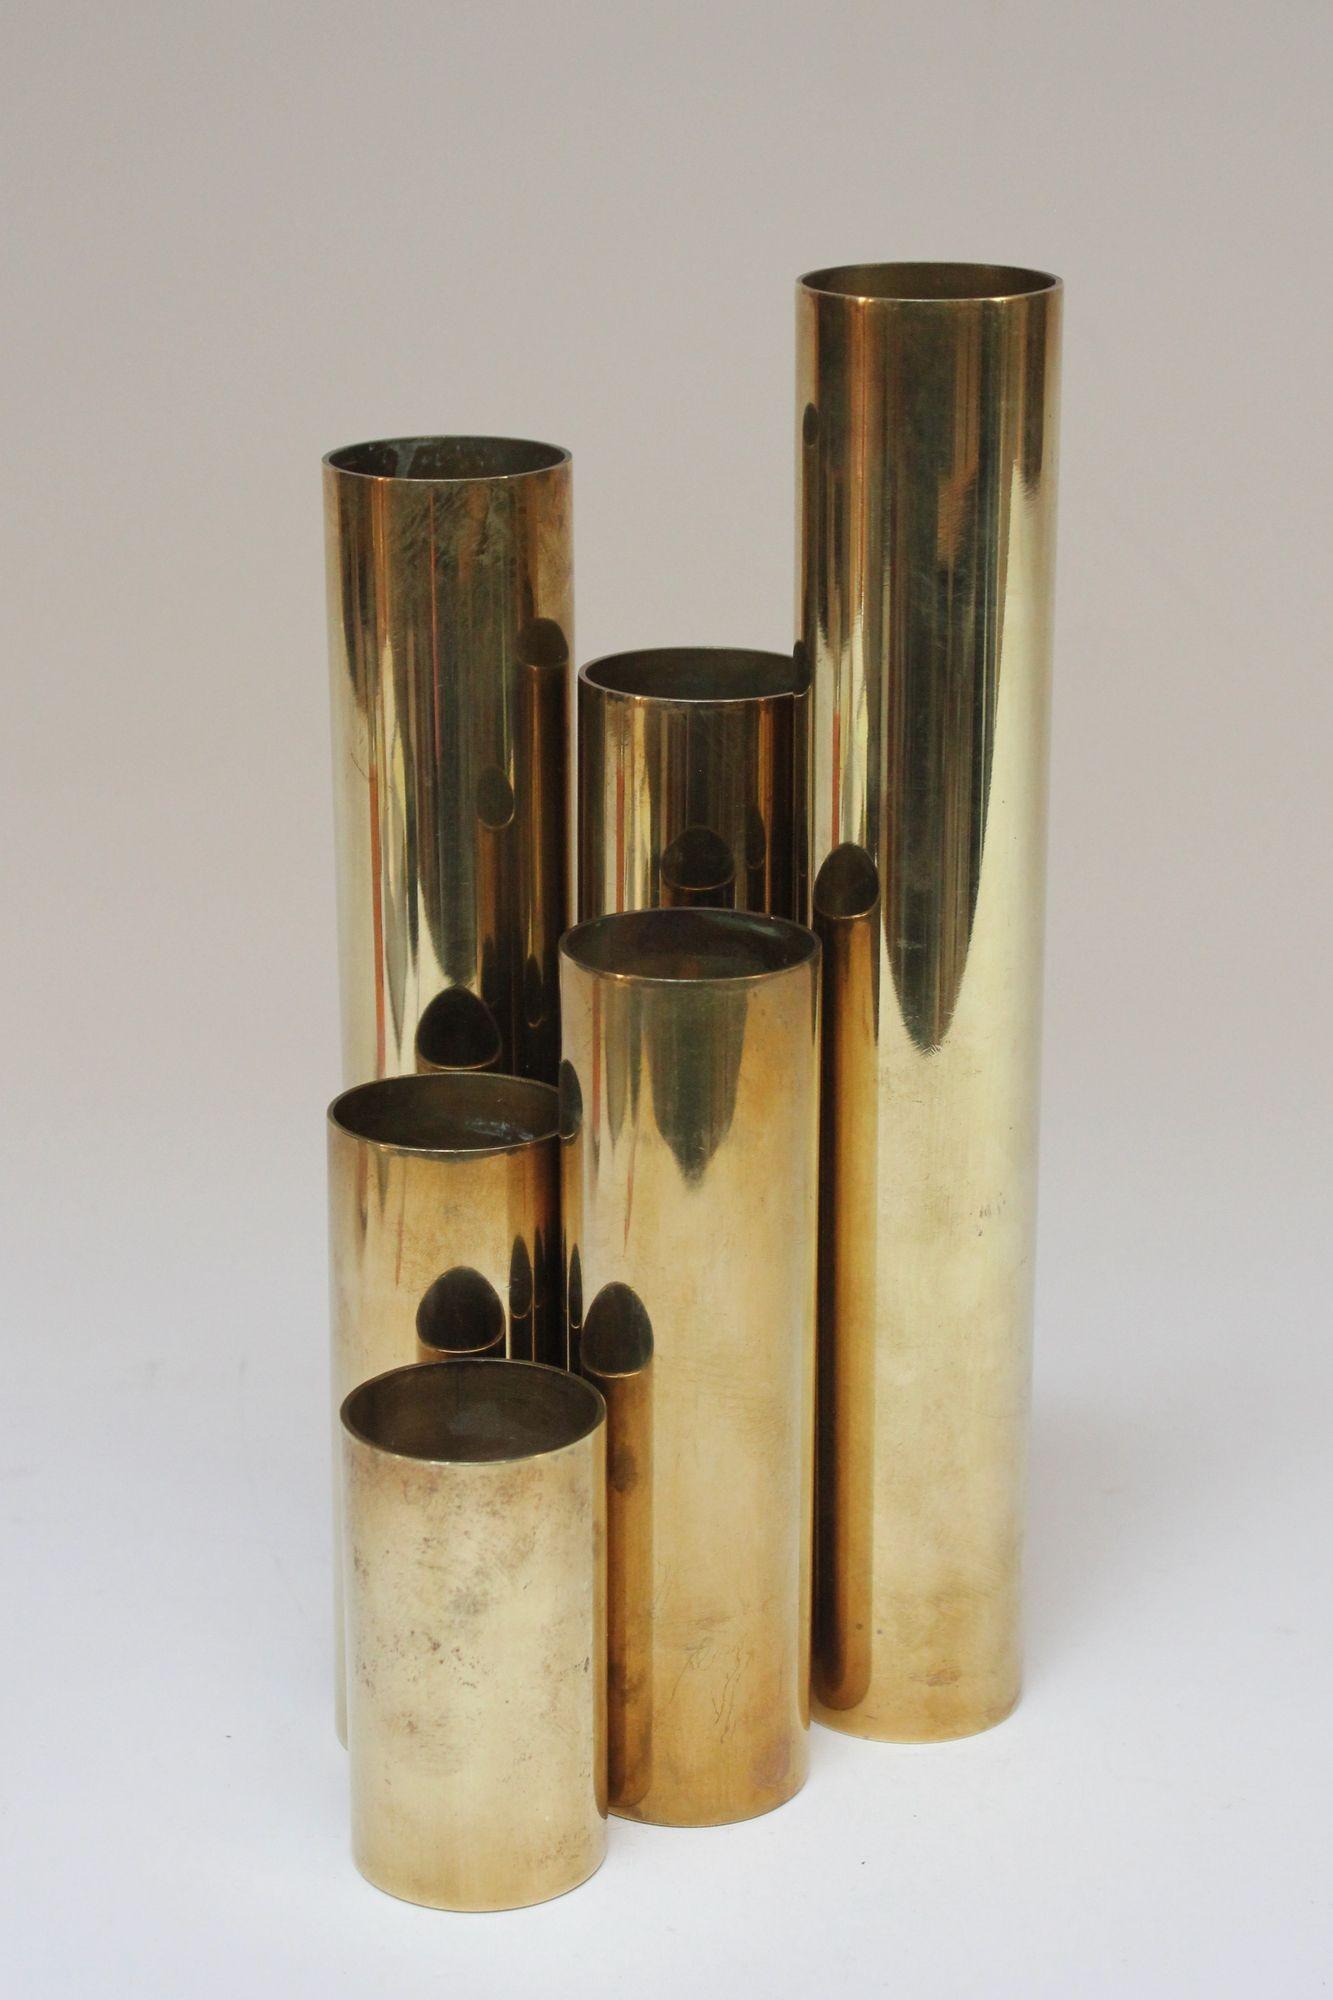 Set of six American Modern brass candle holders in graduating heights (ca. 1970s).
Minimalist cylindrical form - attractive when displayed together as a candelabra cluster or spread out individually.
Reminiscent of a design by Gio Ponti, but